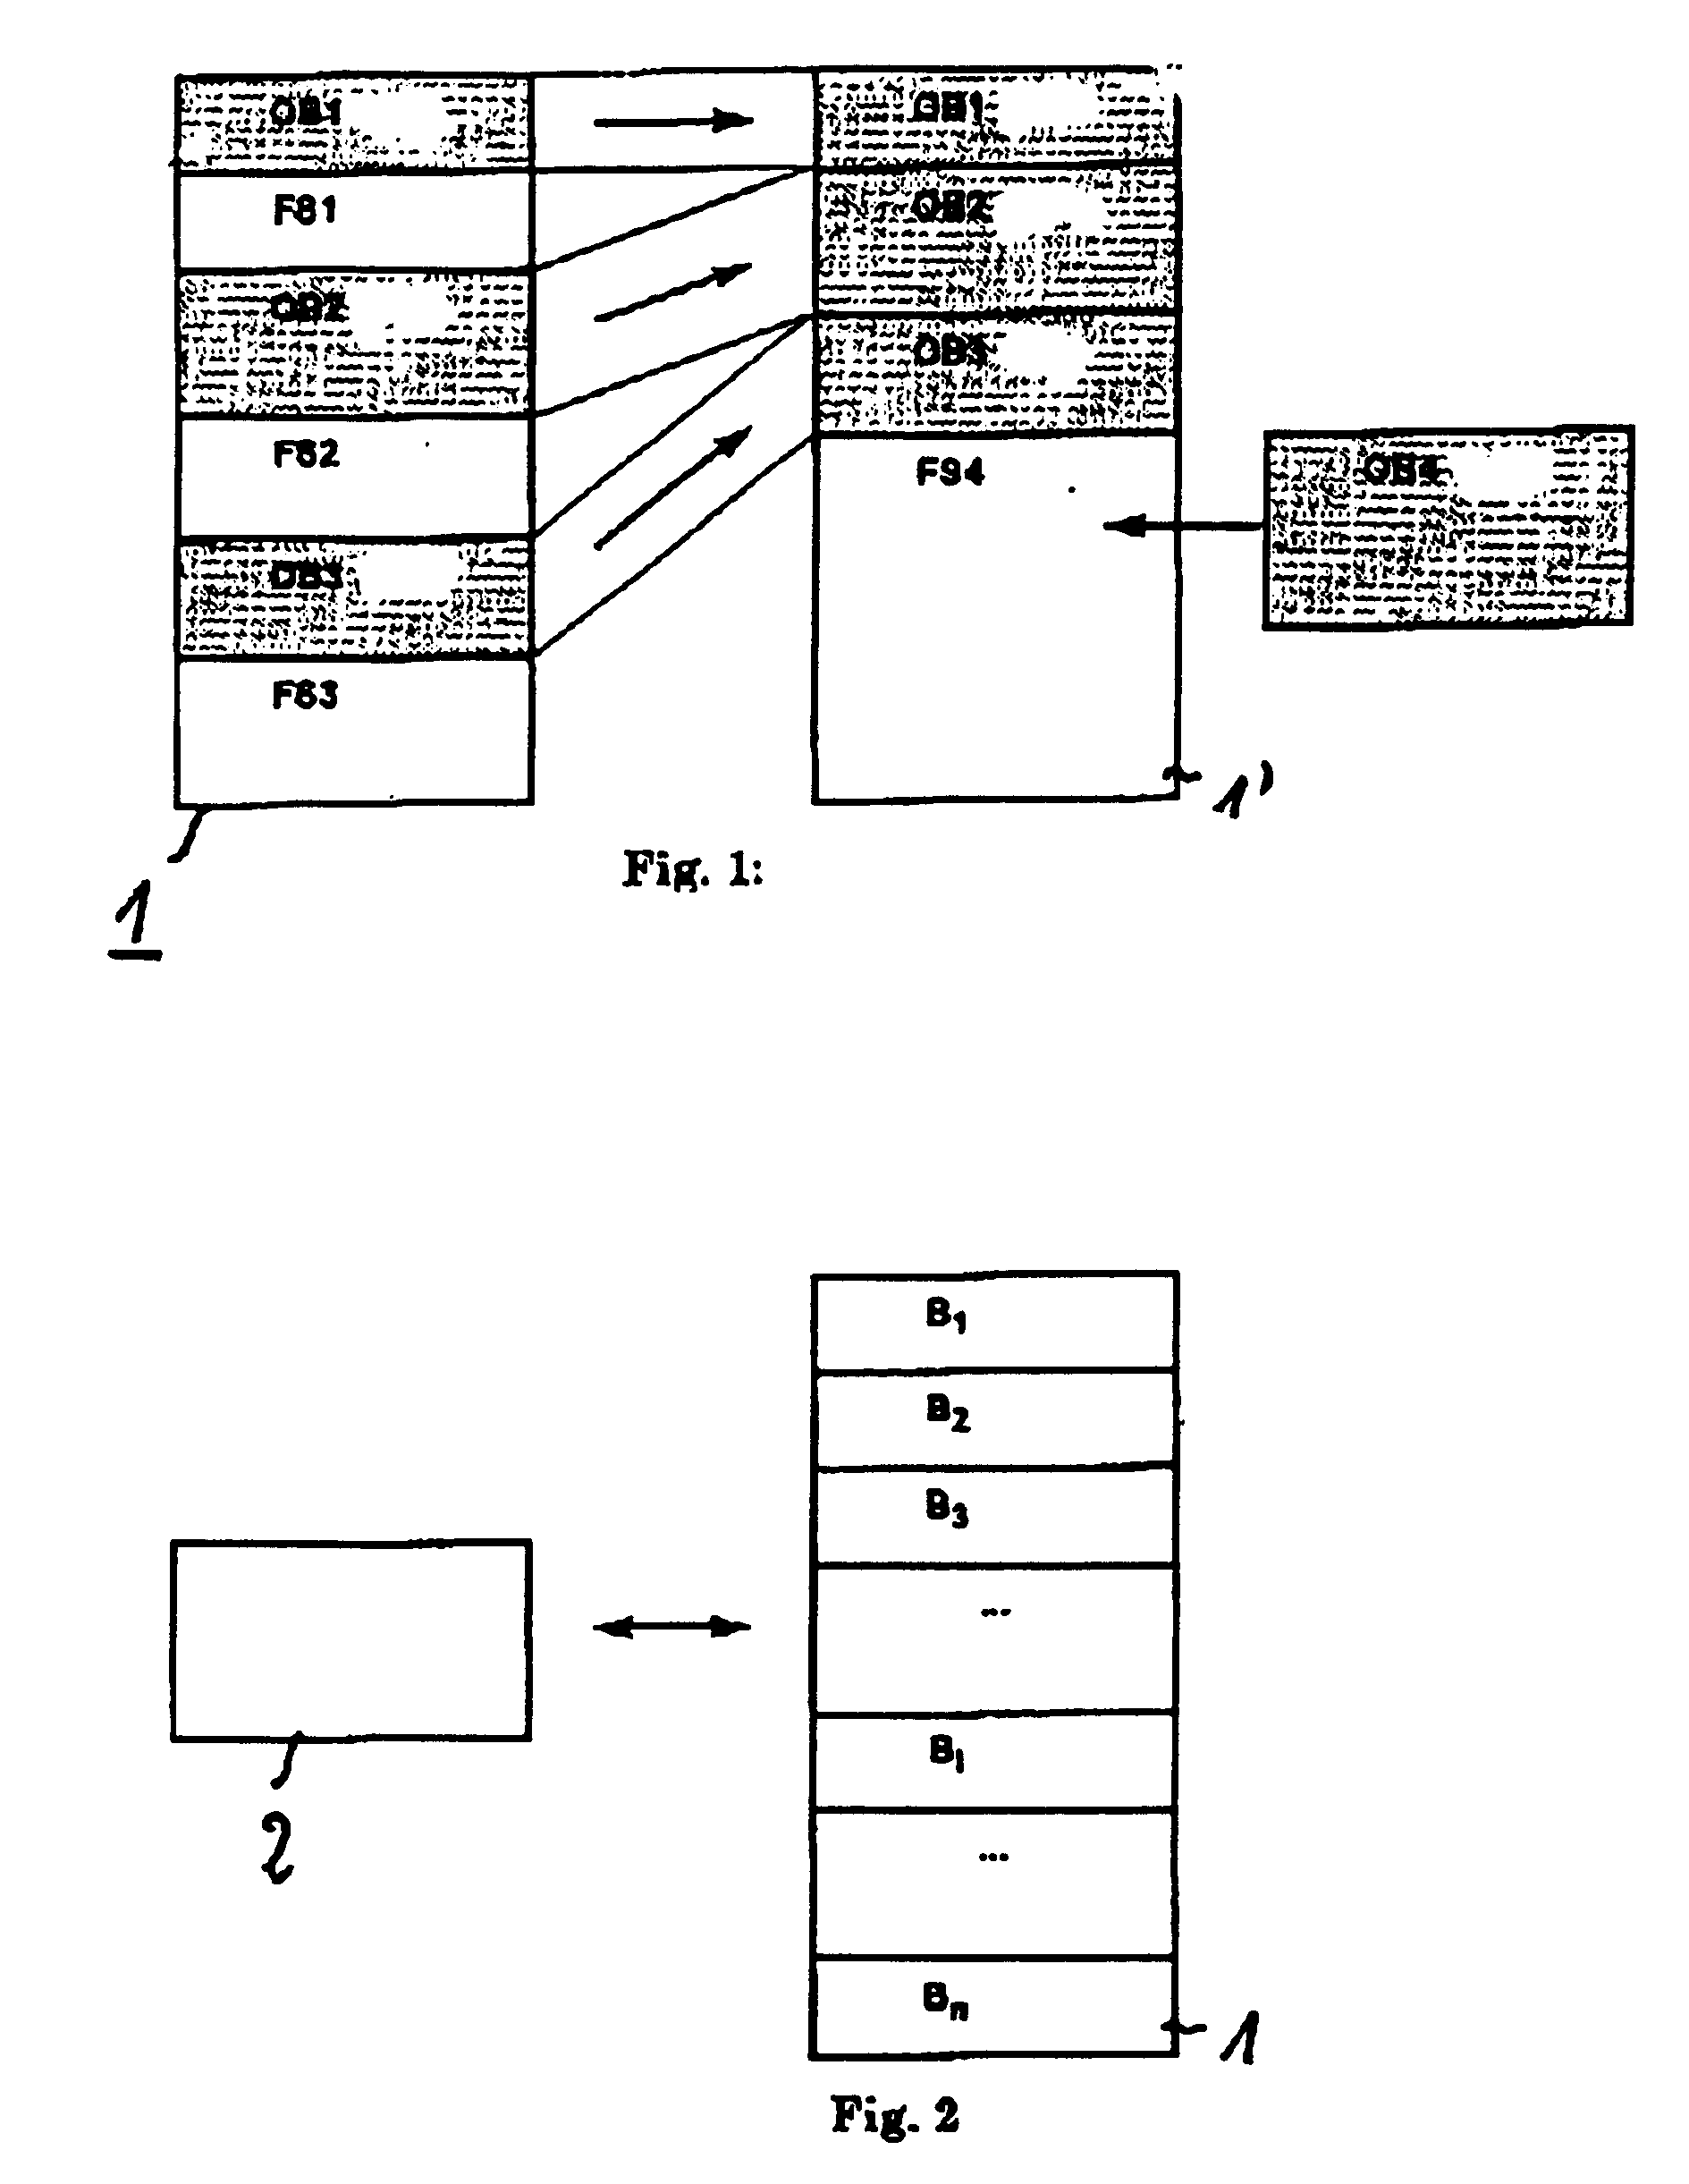 Method of dynamically allocating a memory